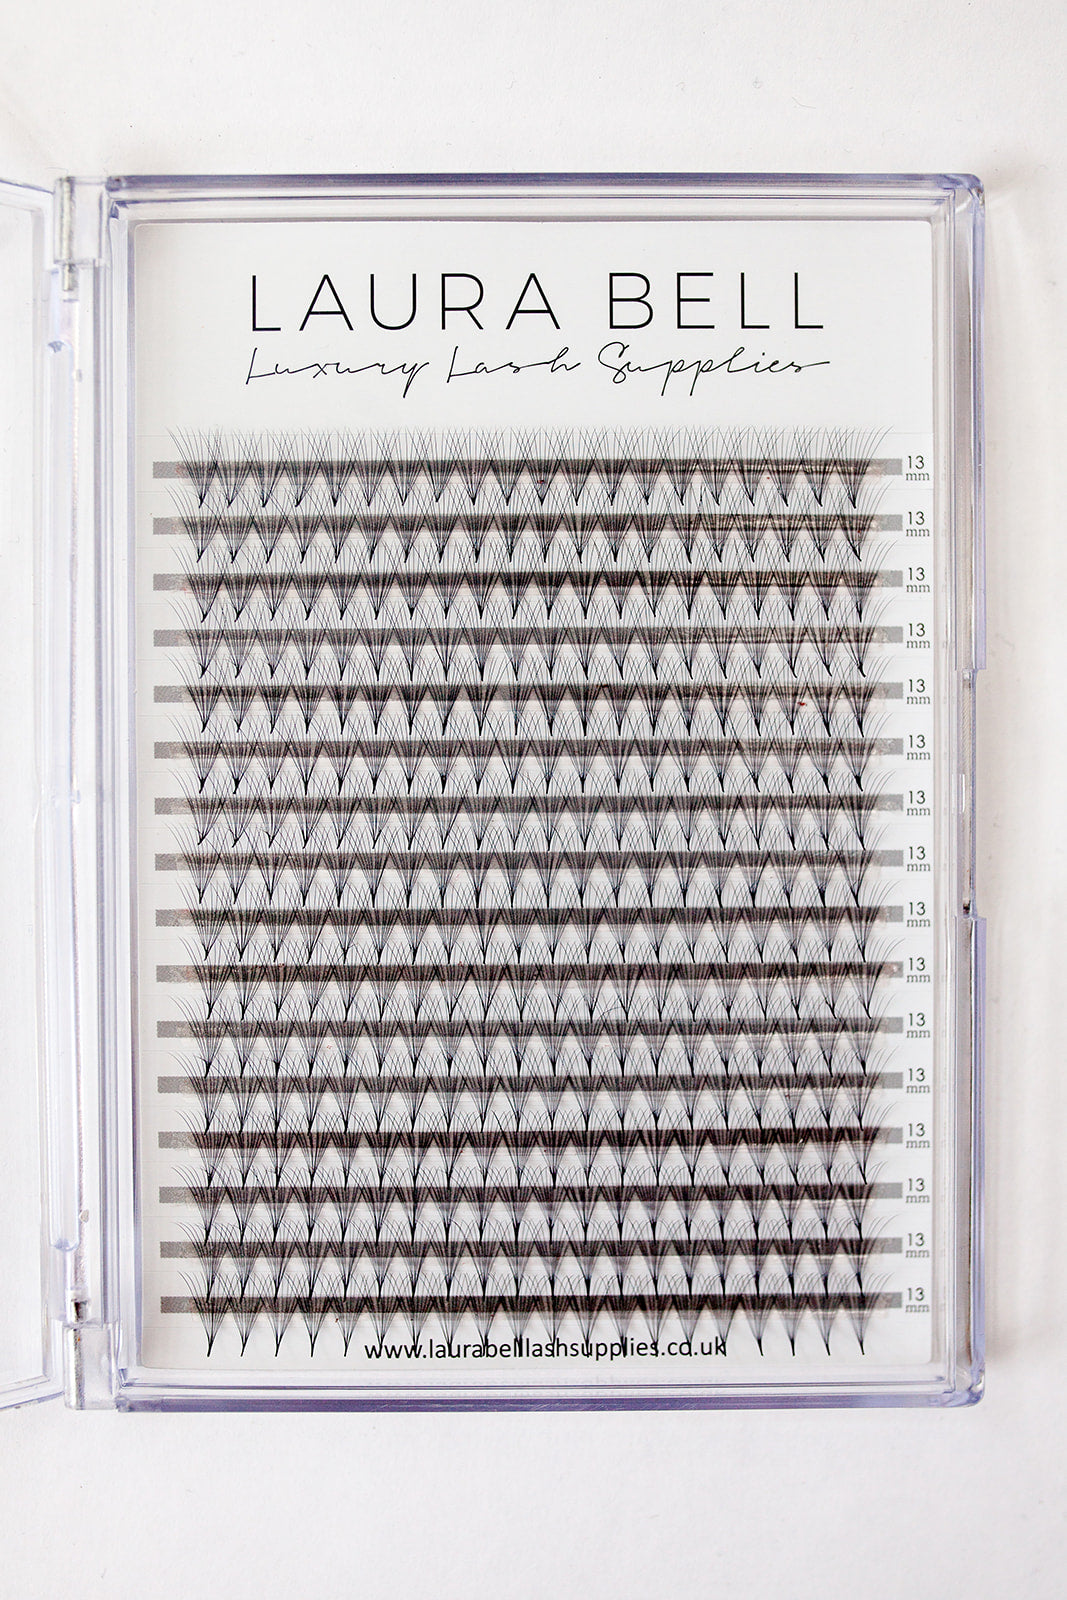 10D Pre Made Volume Large Tray - Laura Bell Luxury Lash Supplies